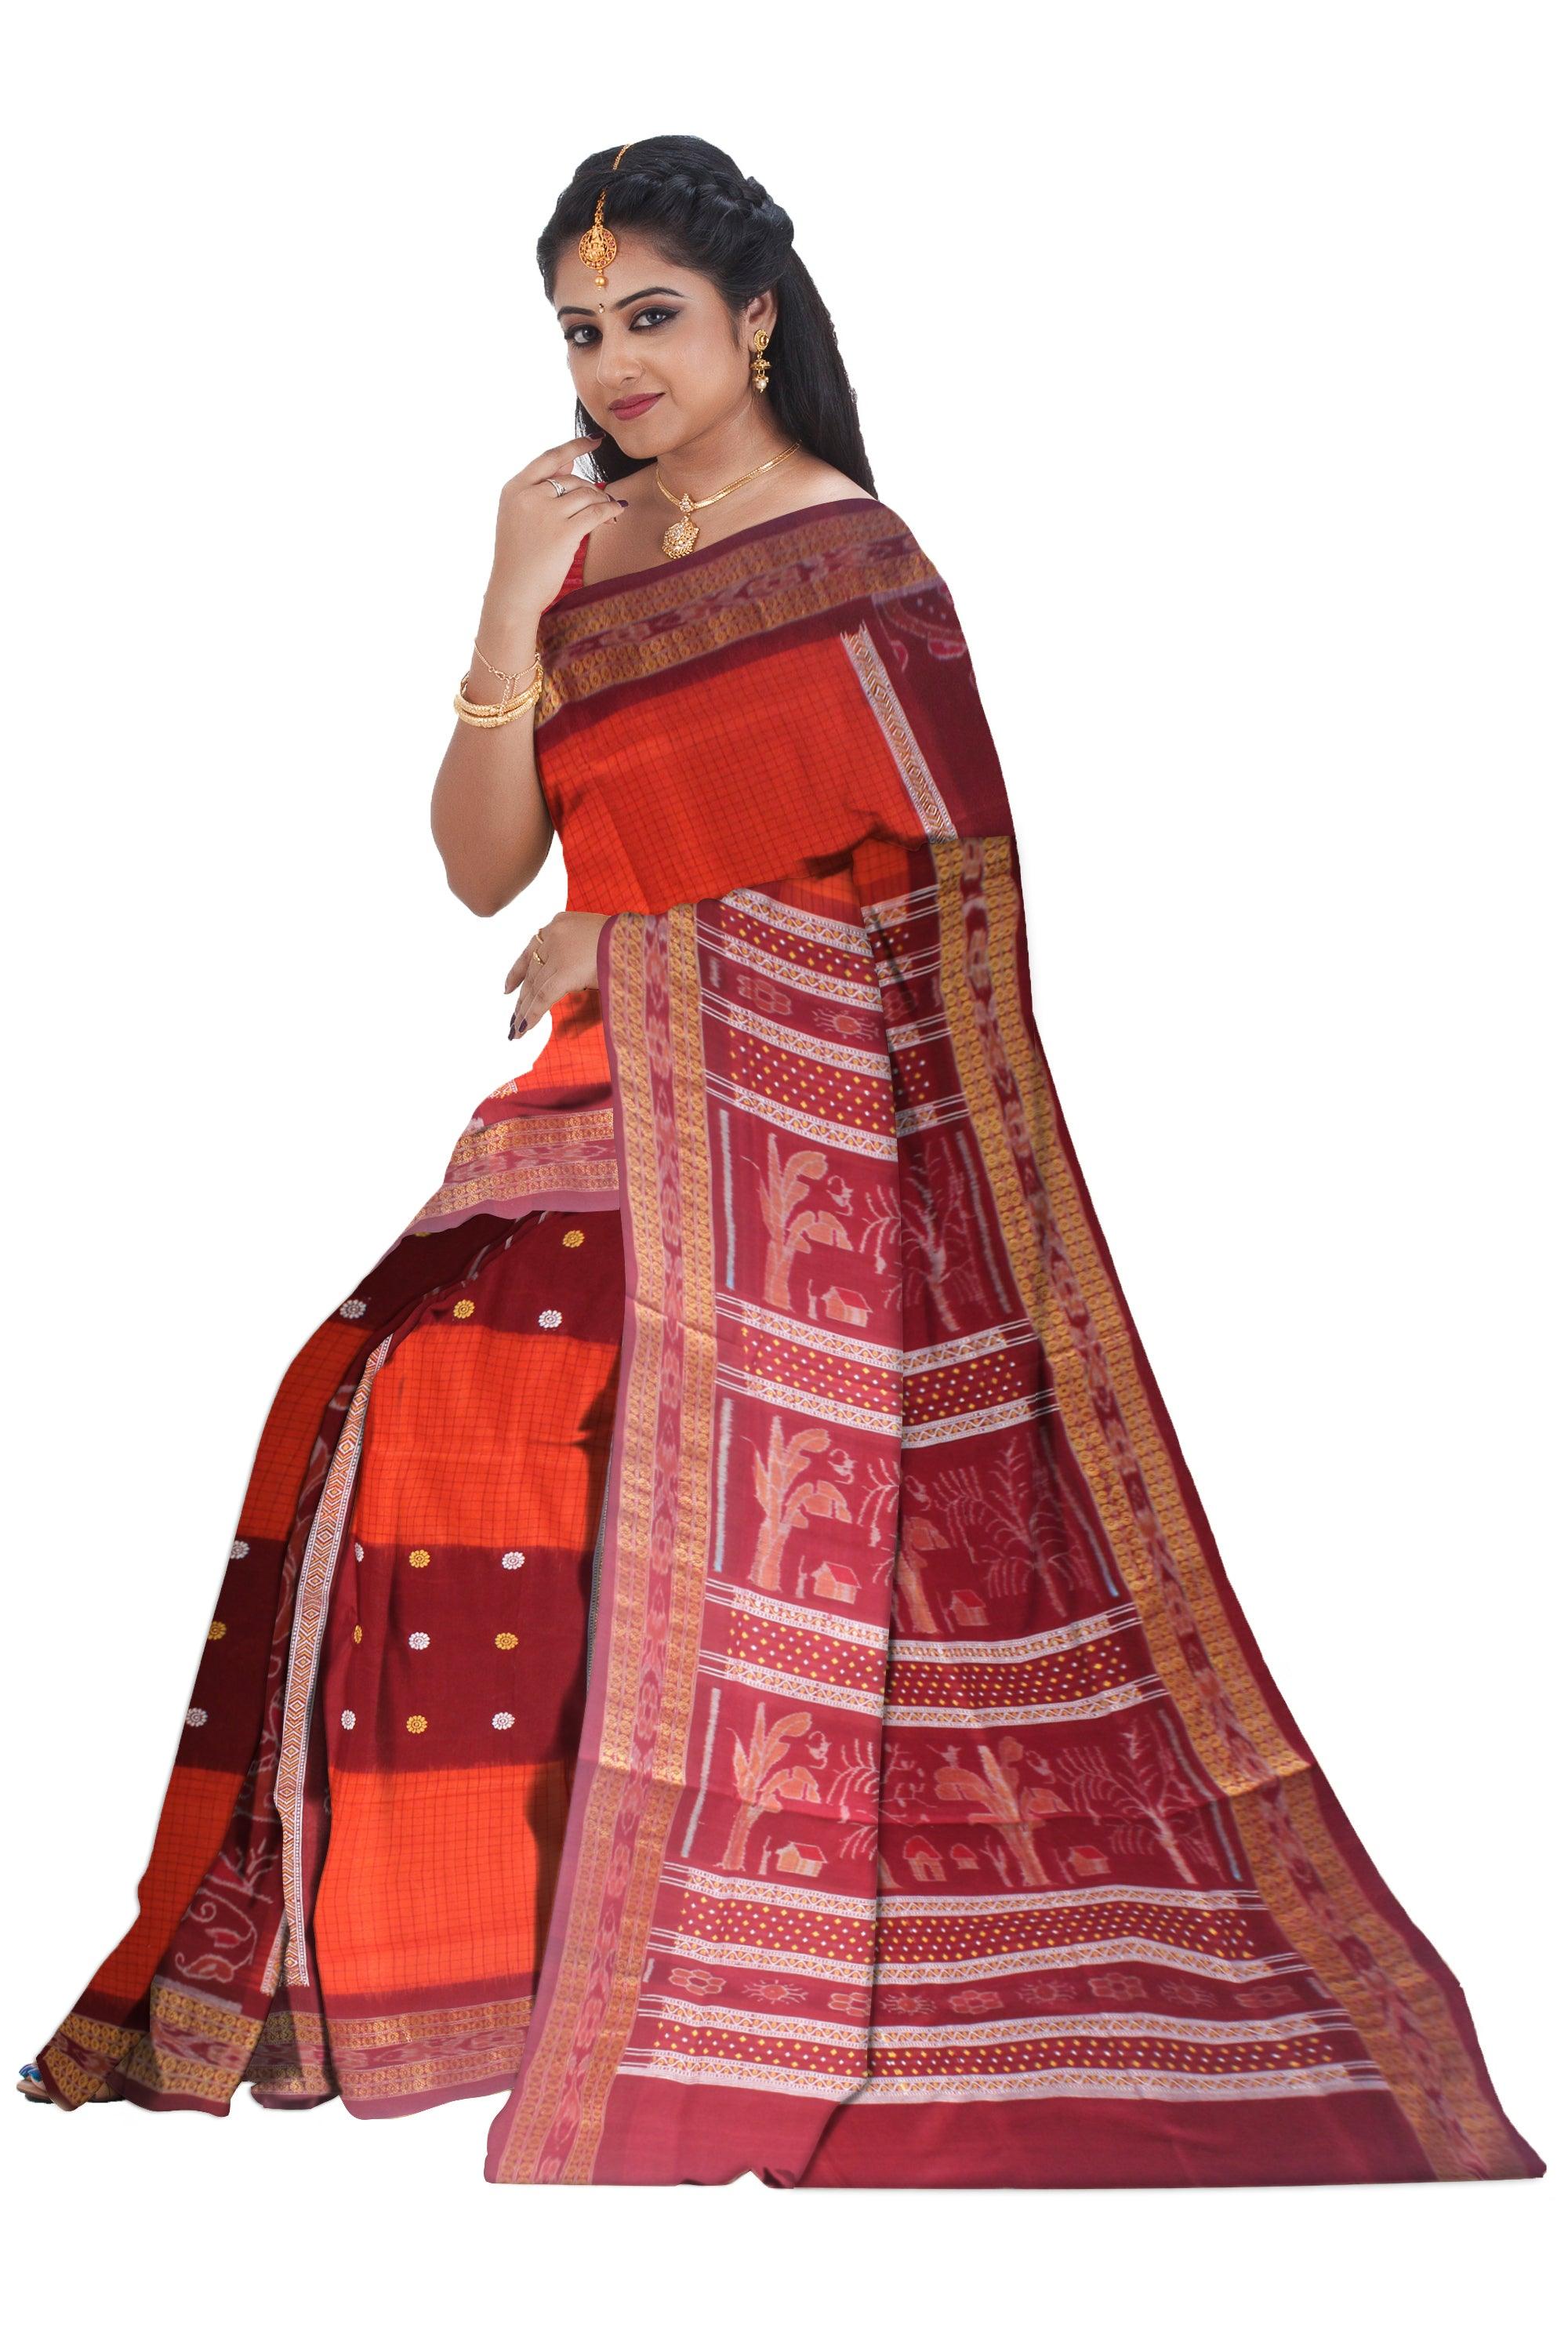 NEW COLLECTION PEACOCK DESIGN WITH BOOTY  PATTERN  COTTON SAREE IN MAROON AND RED COLOR, AVAILABLE WITH BLOUSE. - Koshali Arts & Crafts Enterprise